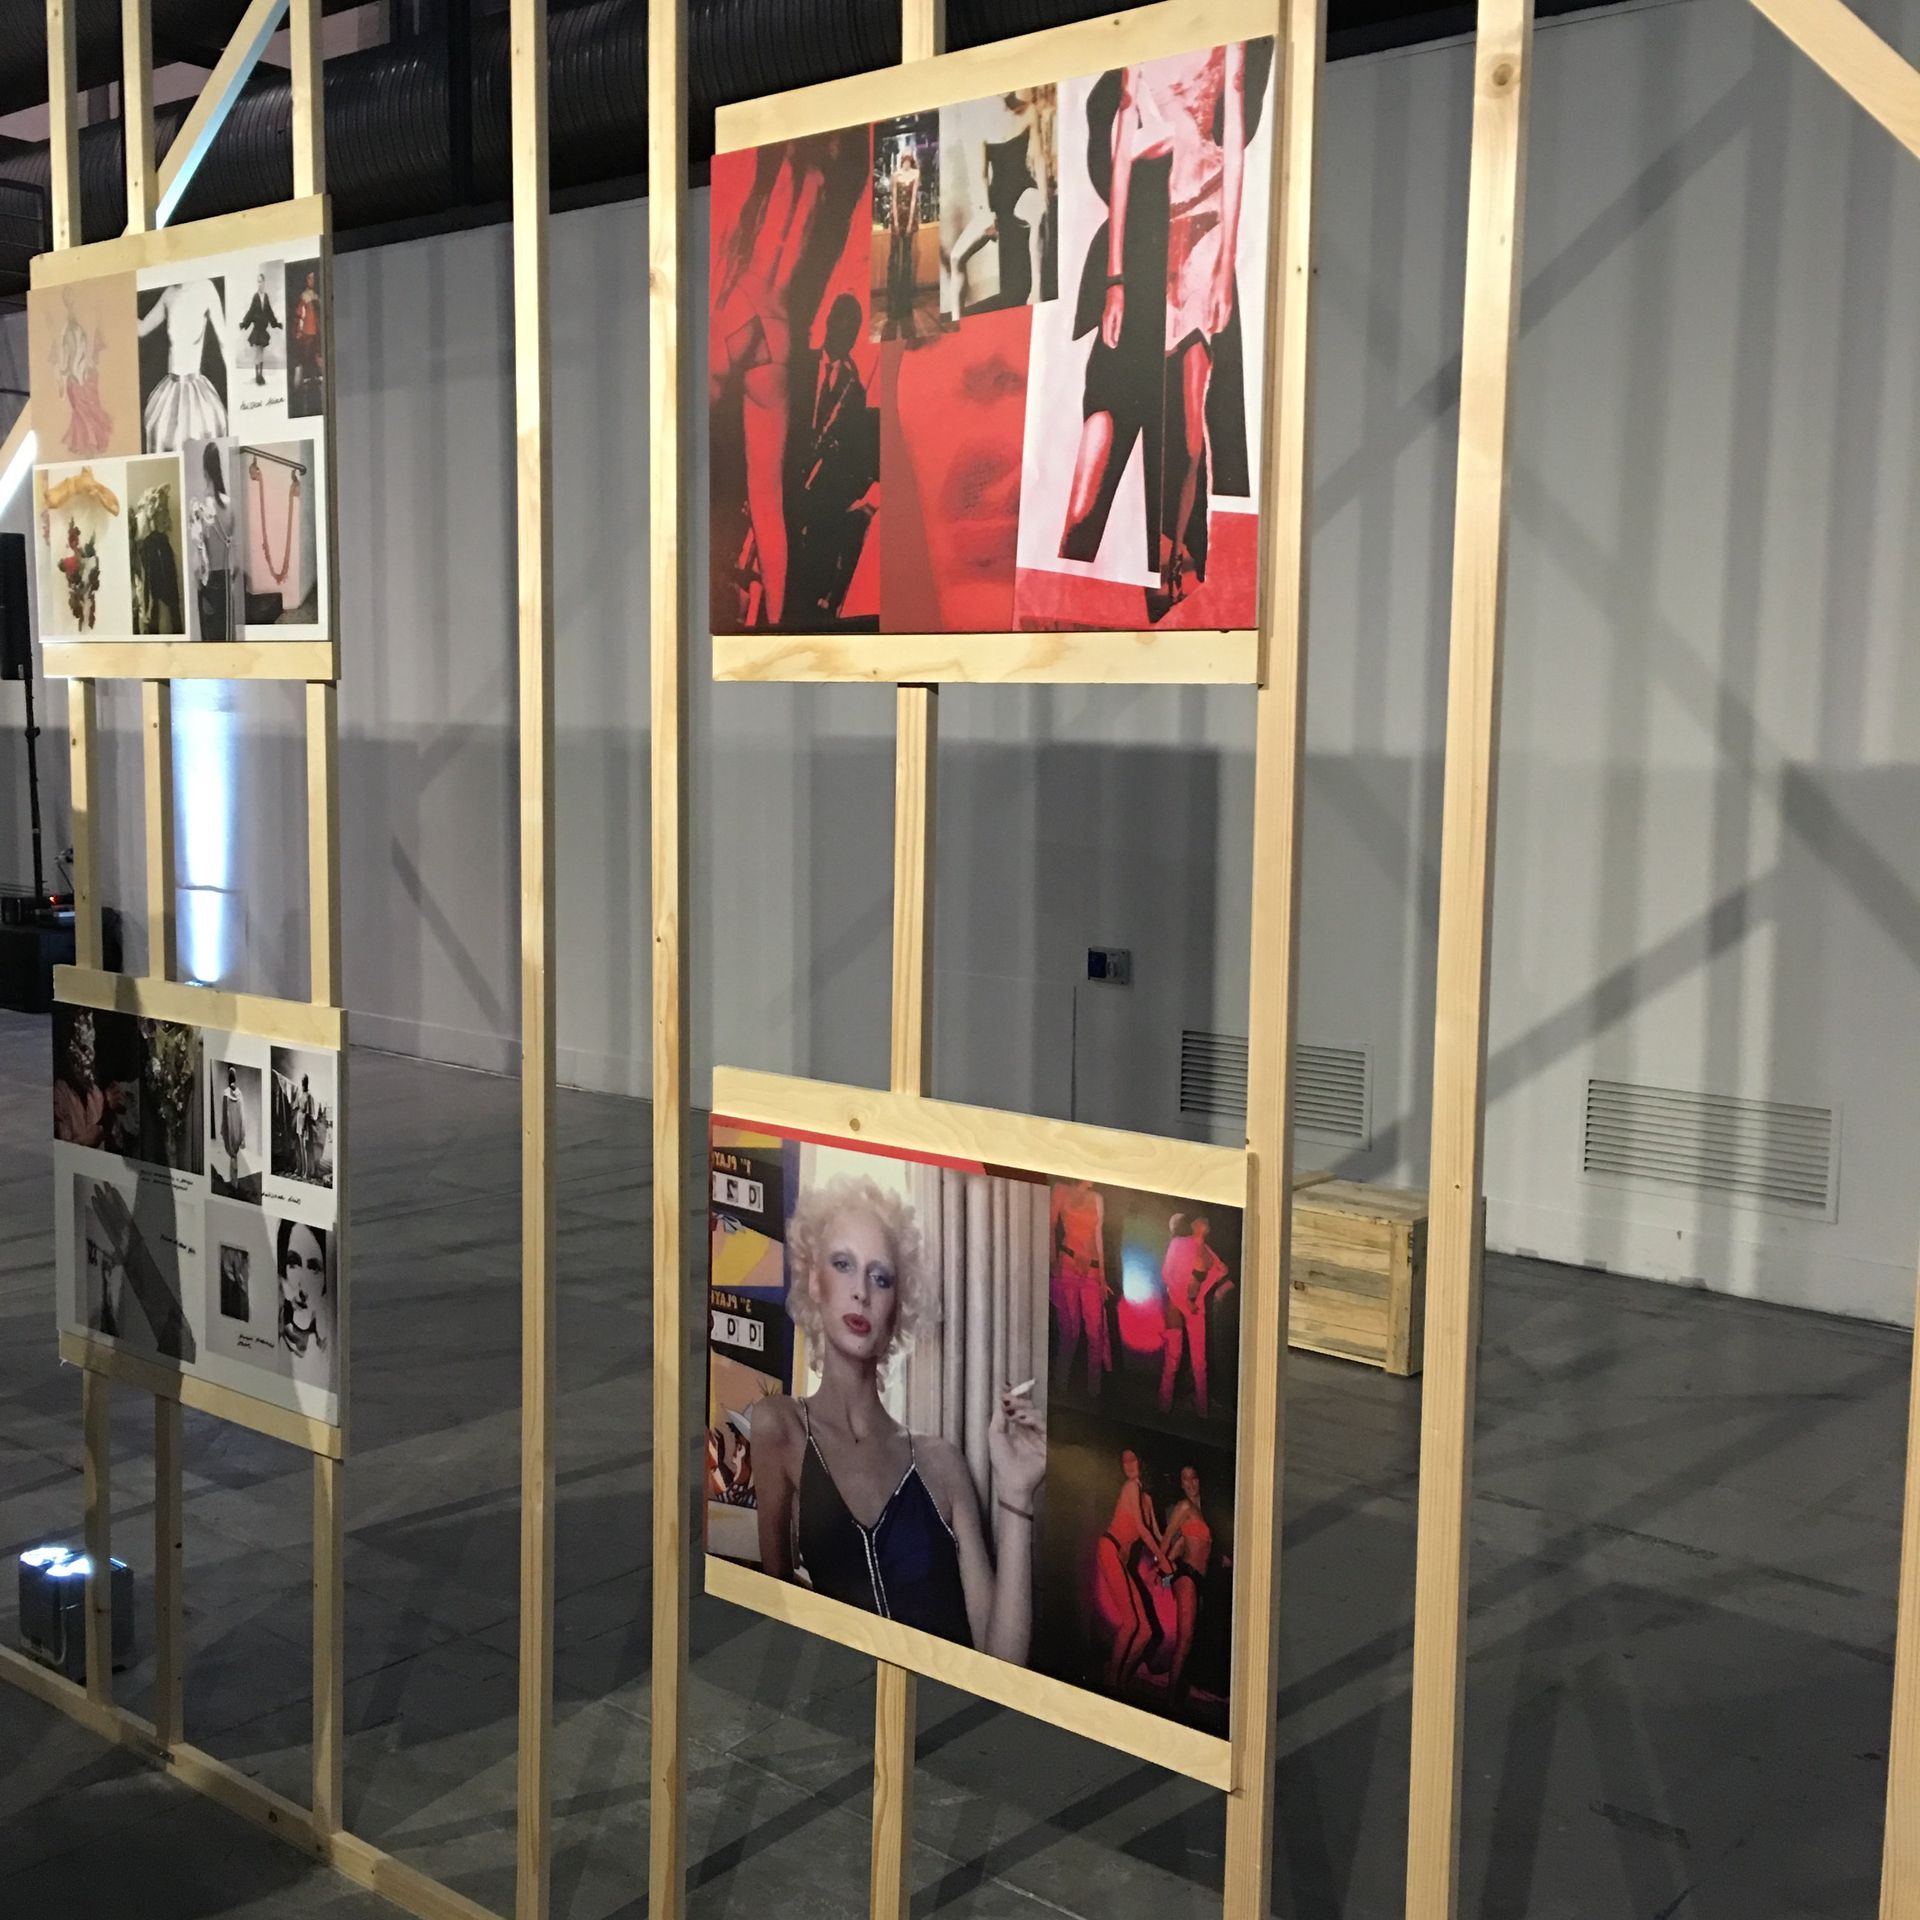 Milano Fashion Week begins with “The Principle of creativity” Milano Unica exhibition about moodboard